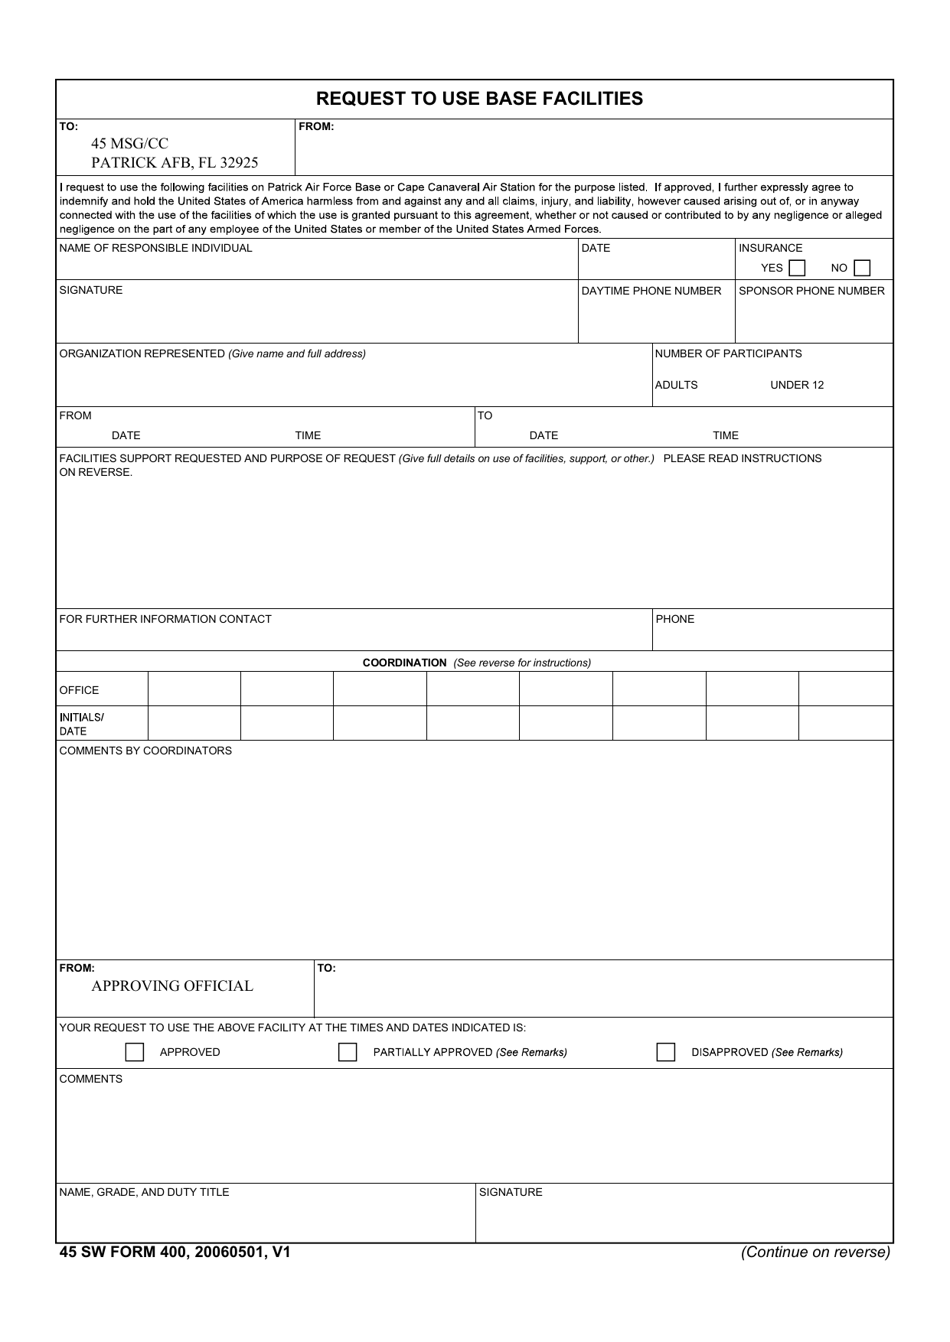 45 SW Form 400 Request to Use Base Facilities, Page 1